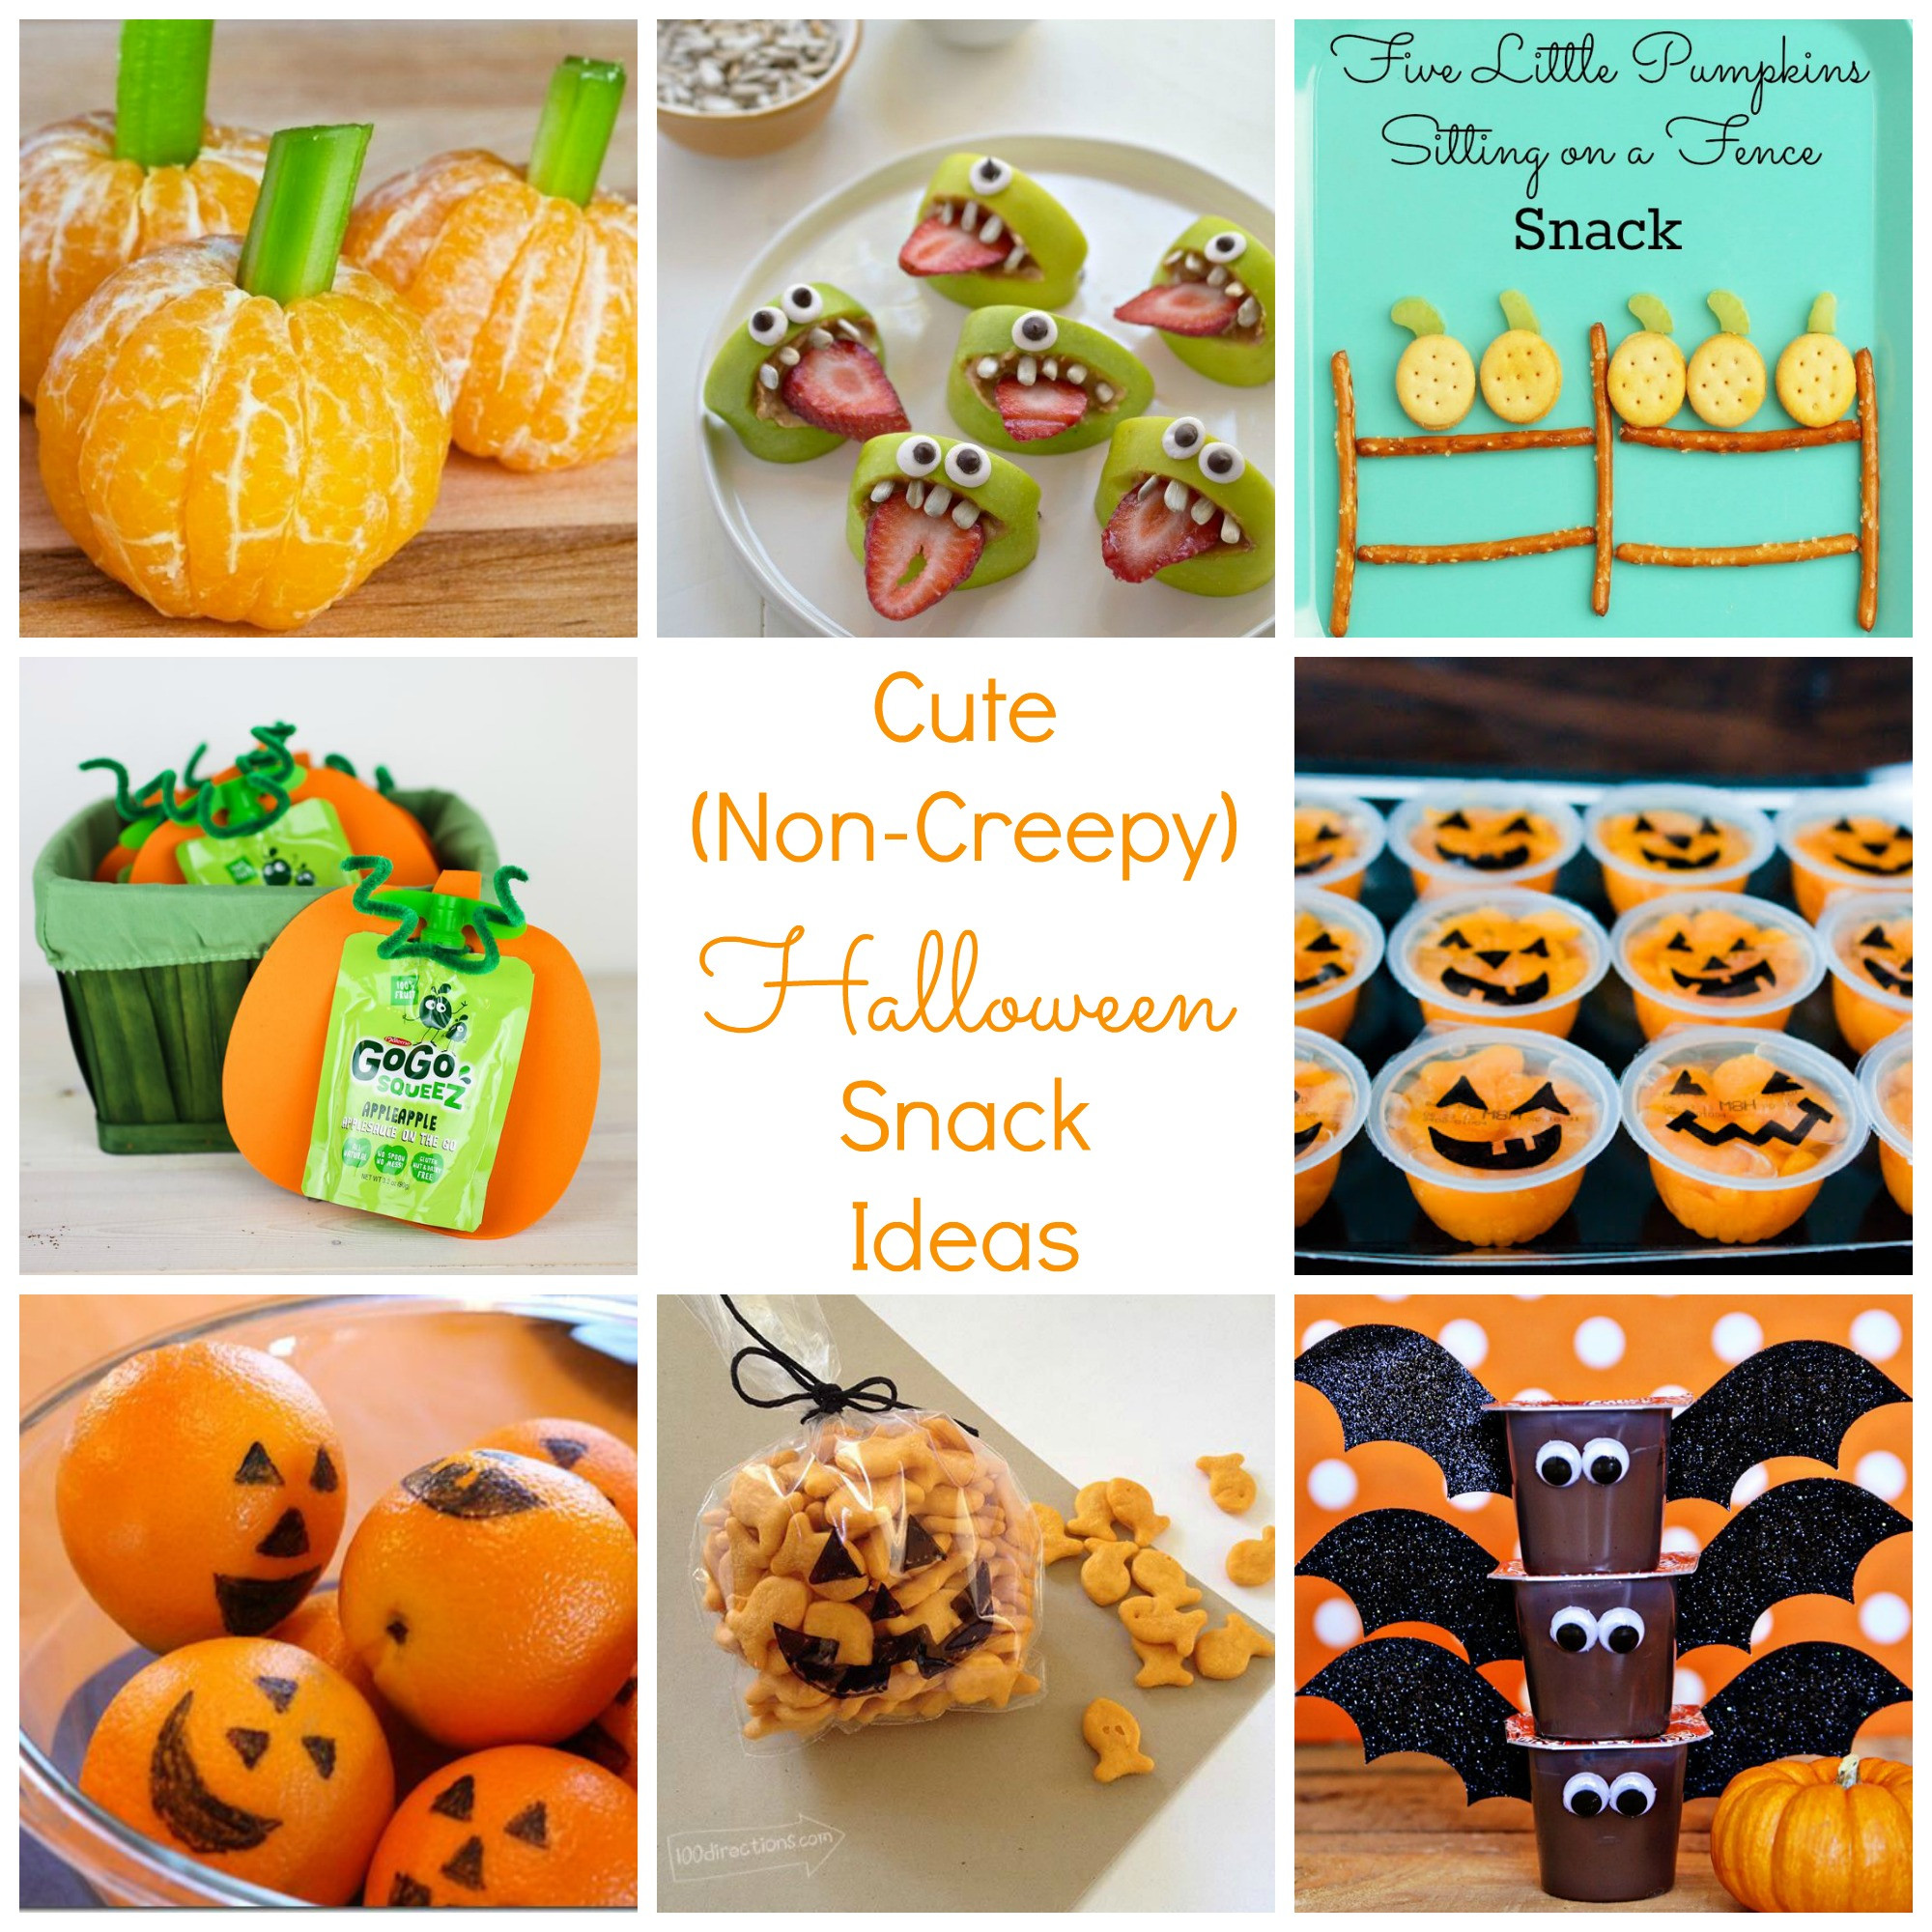 Cute Halloween Food Ideas For Party
 Cute Non Creepy Halloween and Fall Snack Ideas Happy